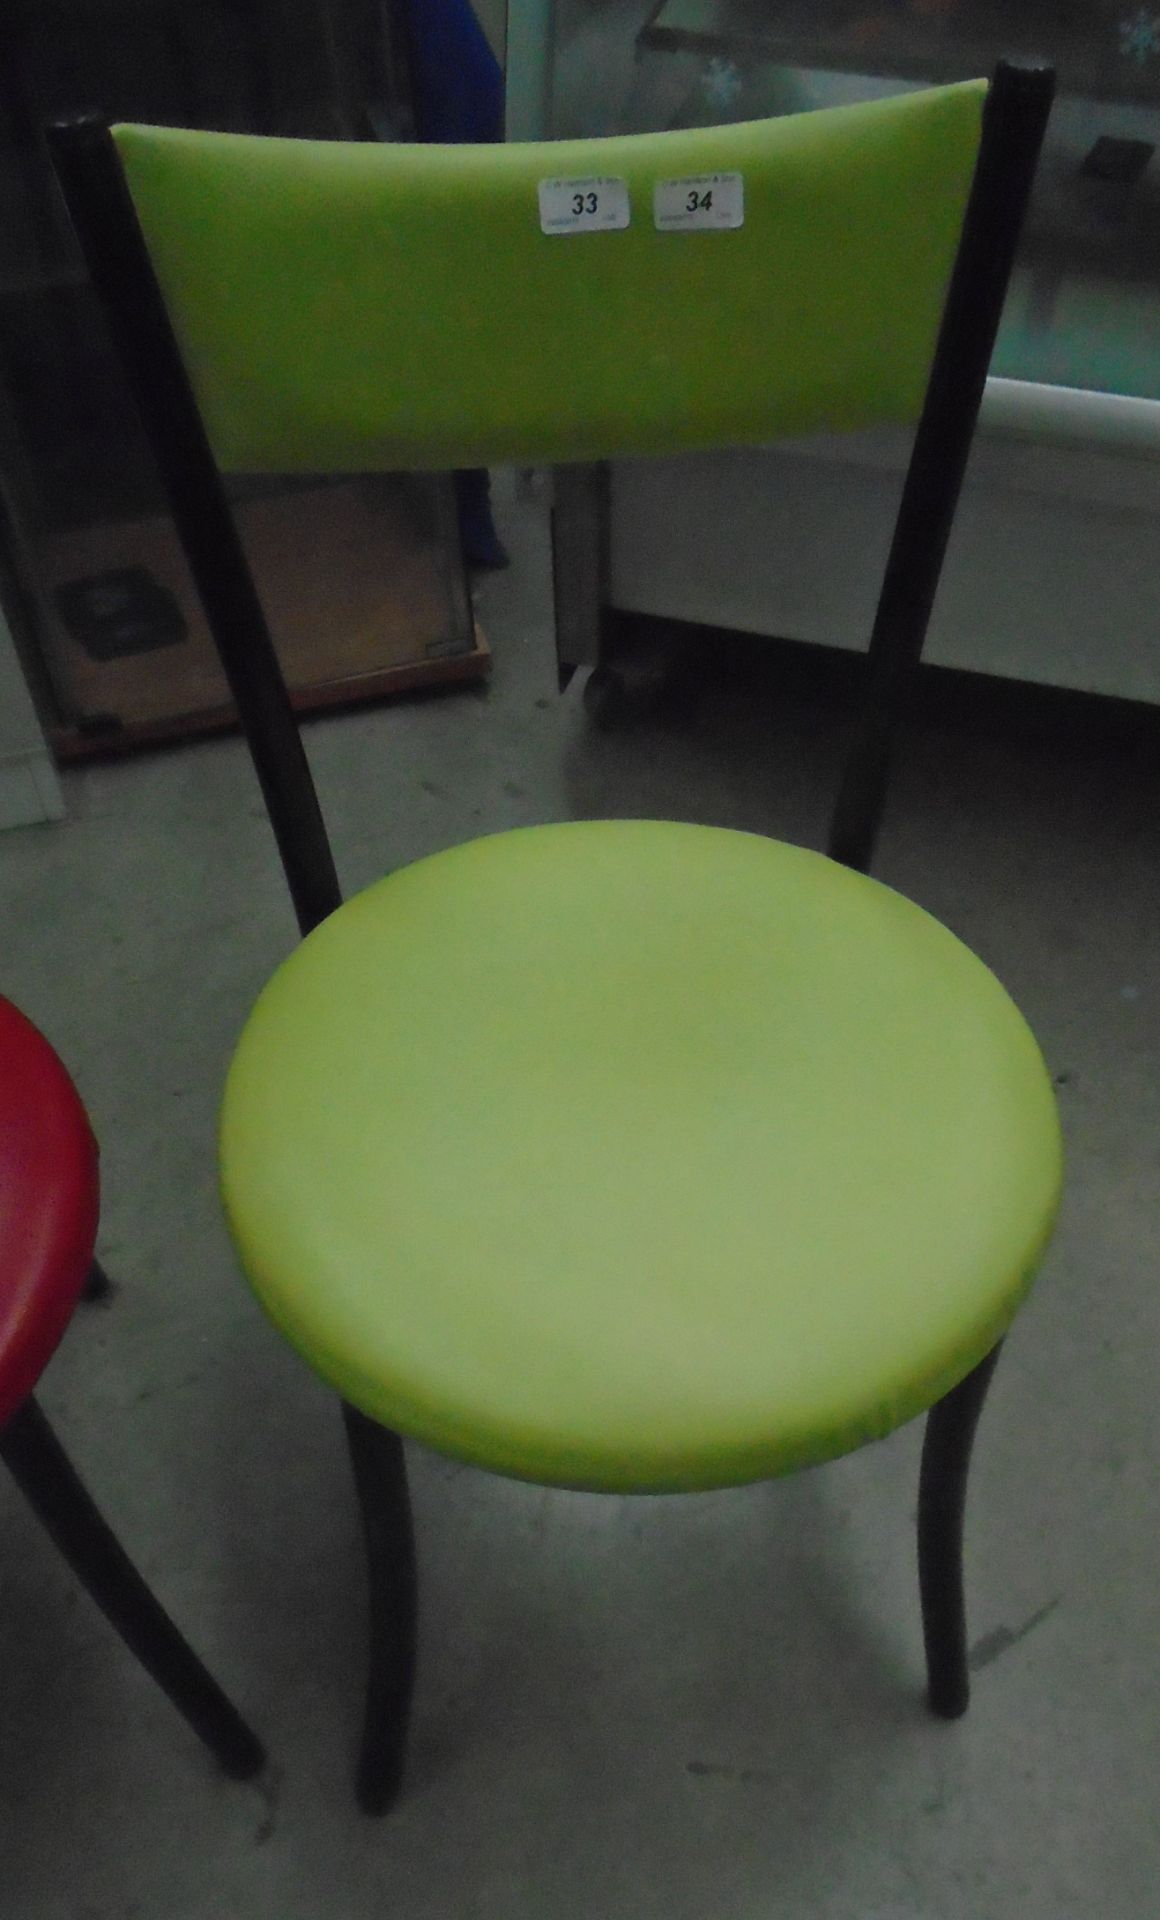 12 x black metal framed cafe chairs with green vinyl upholstery